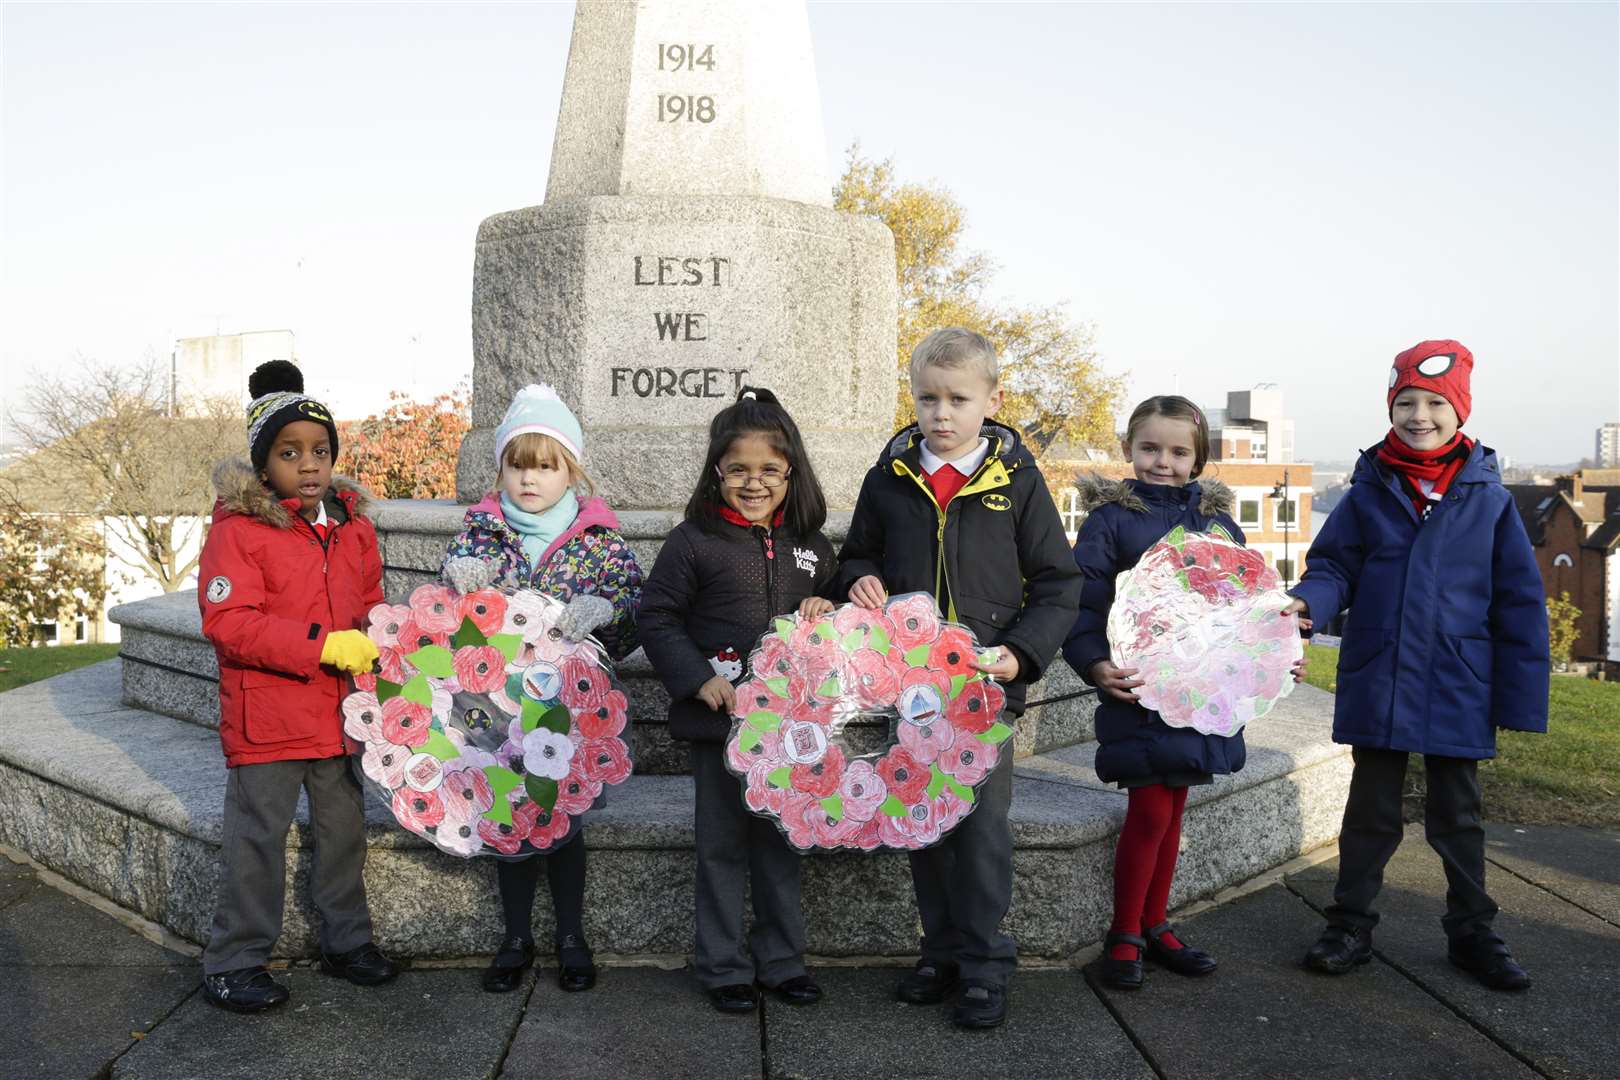 Children from St John's Church of England School in New Street, Chatham laying wreaths with parents, staff and soldiers at Victoria Gardens war memorial